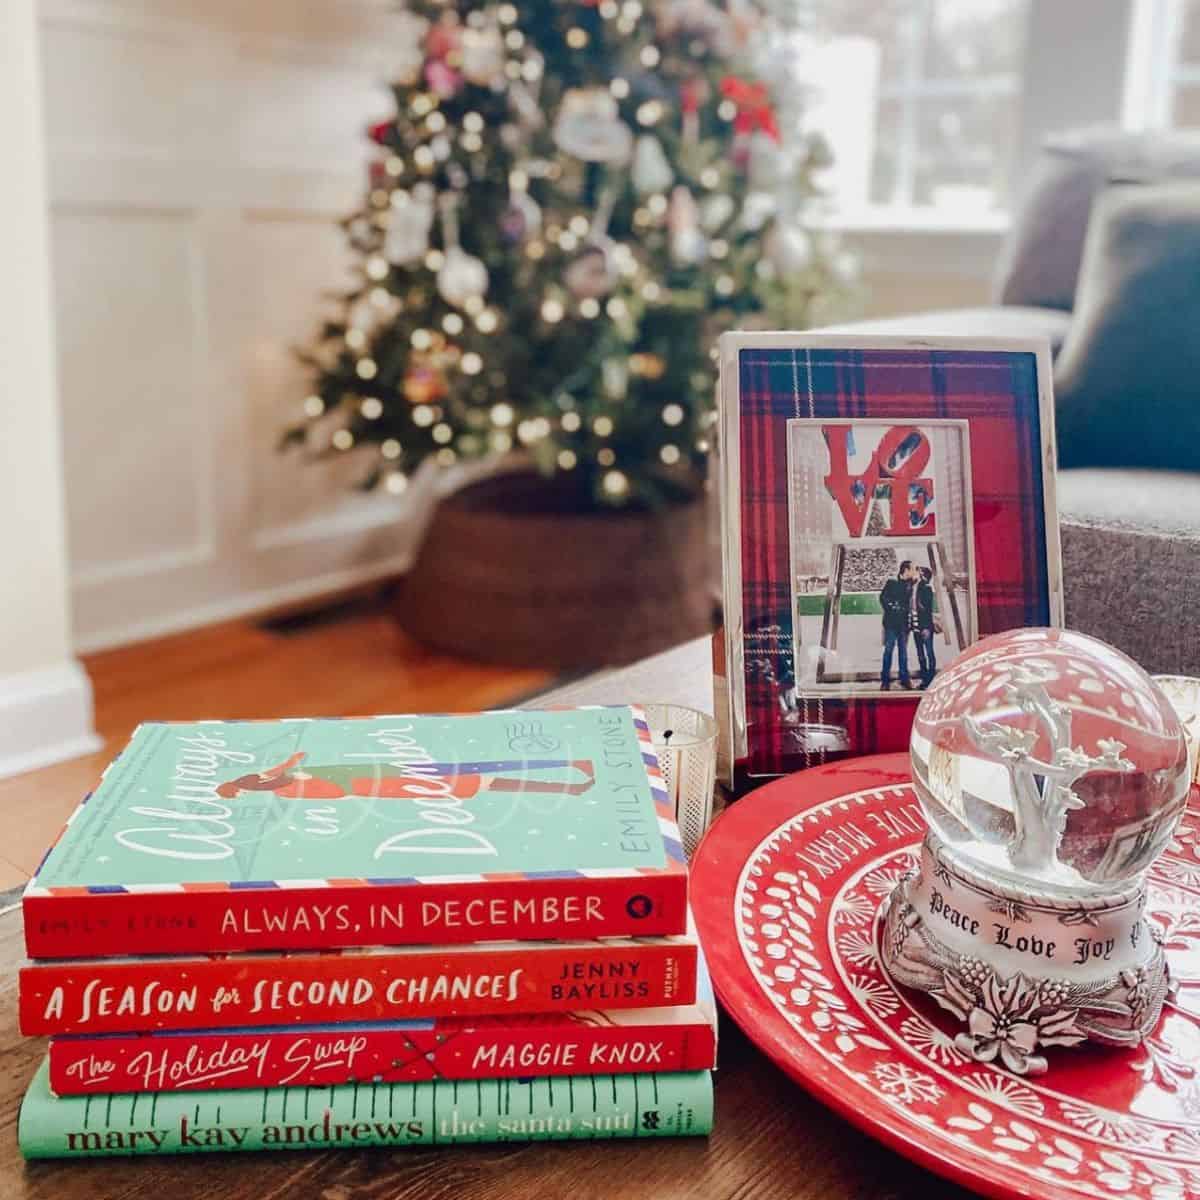 Top 25 Best Christmas Romance Books to Warm Your Heart